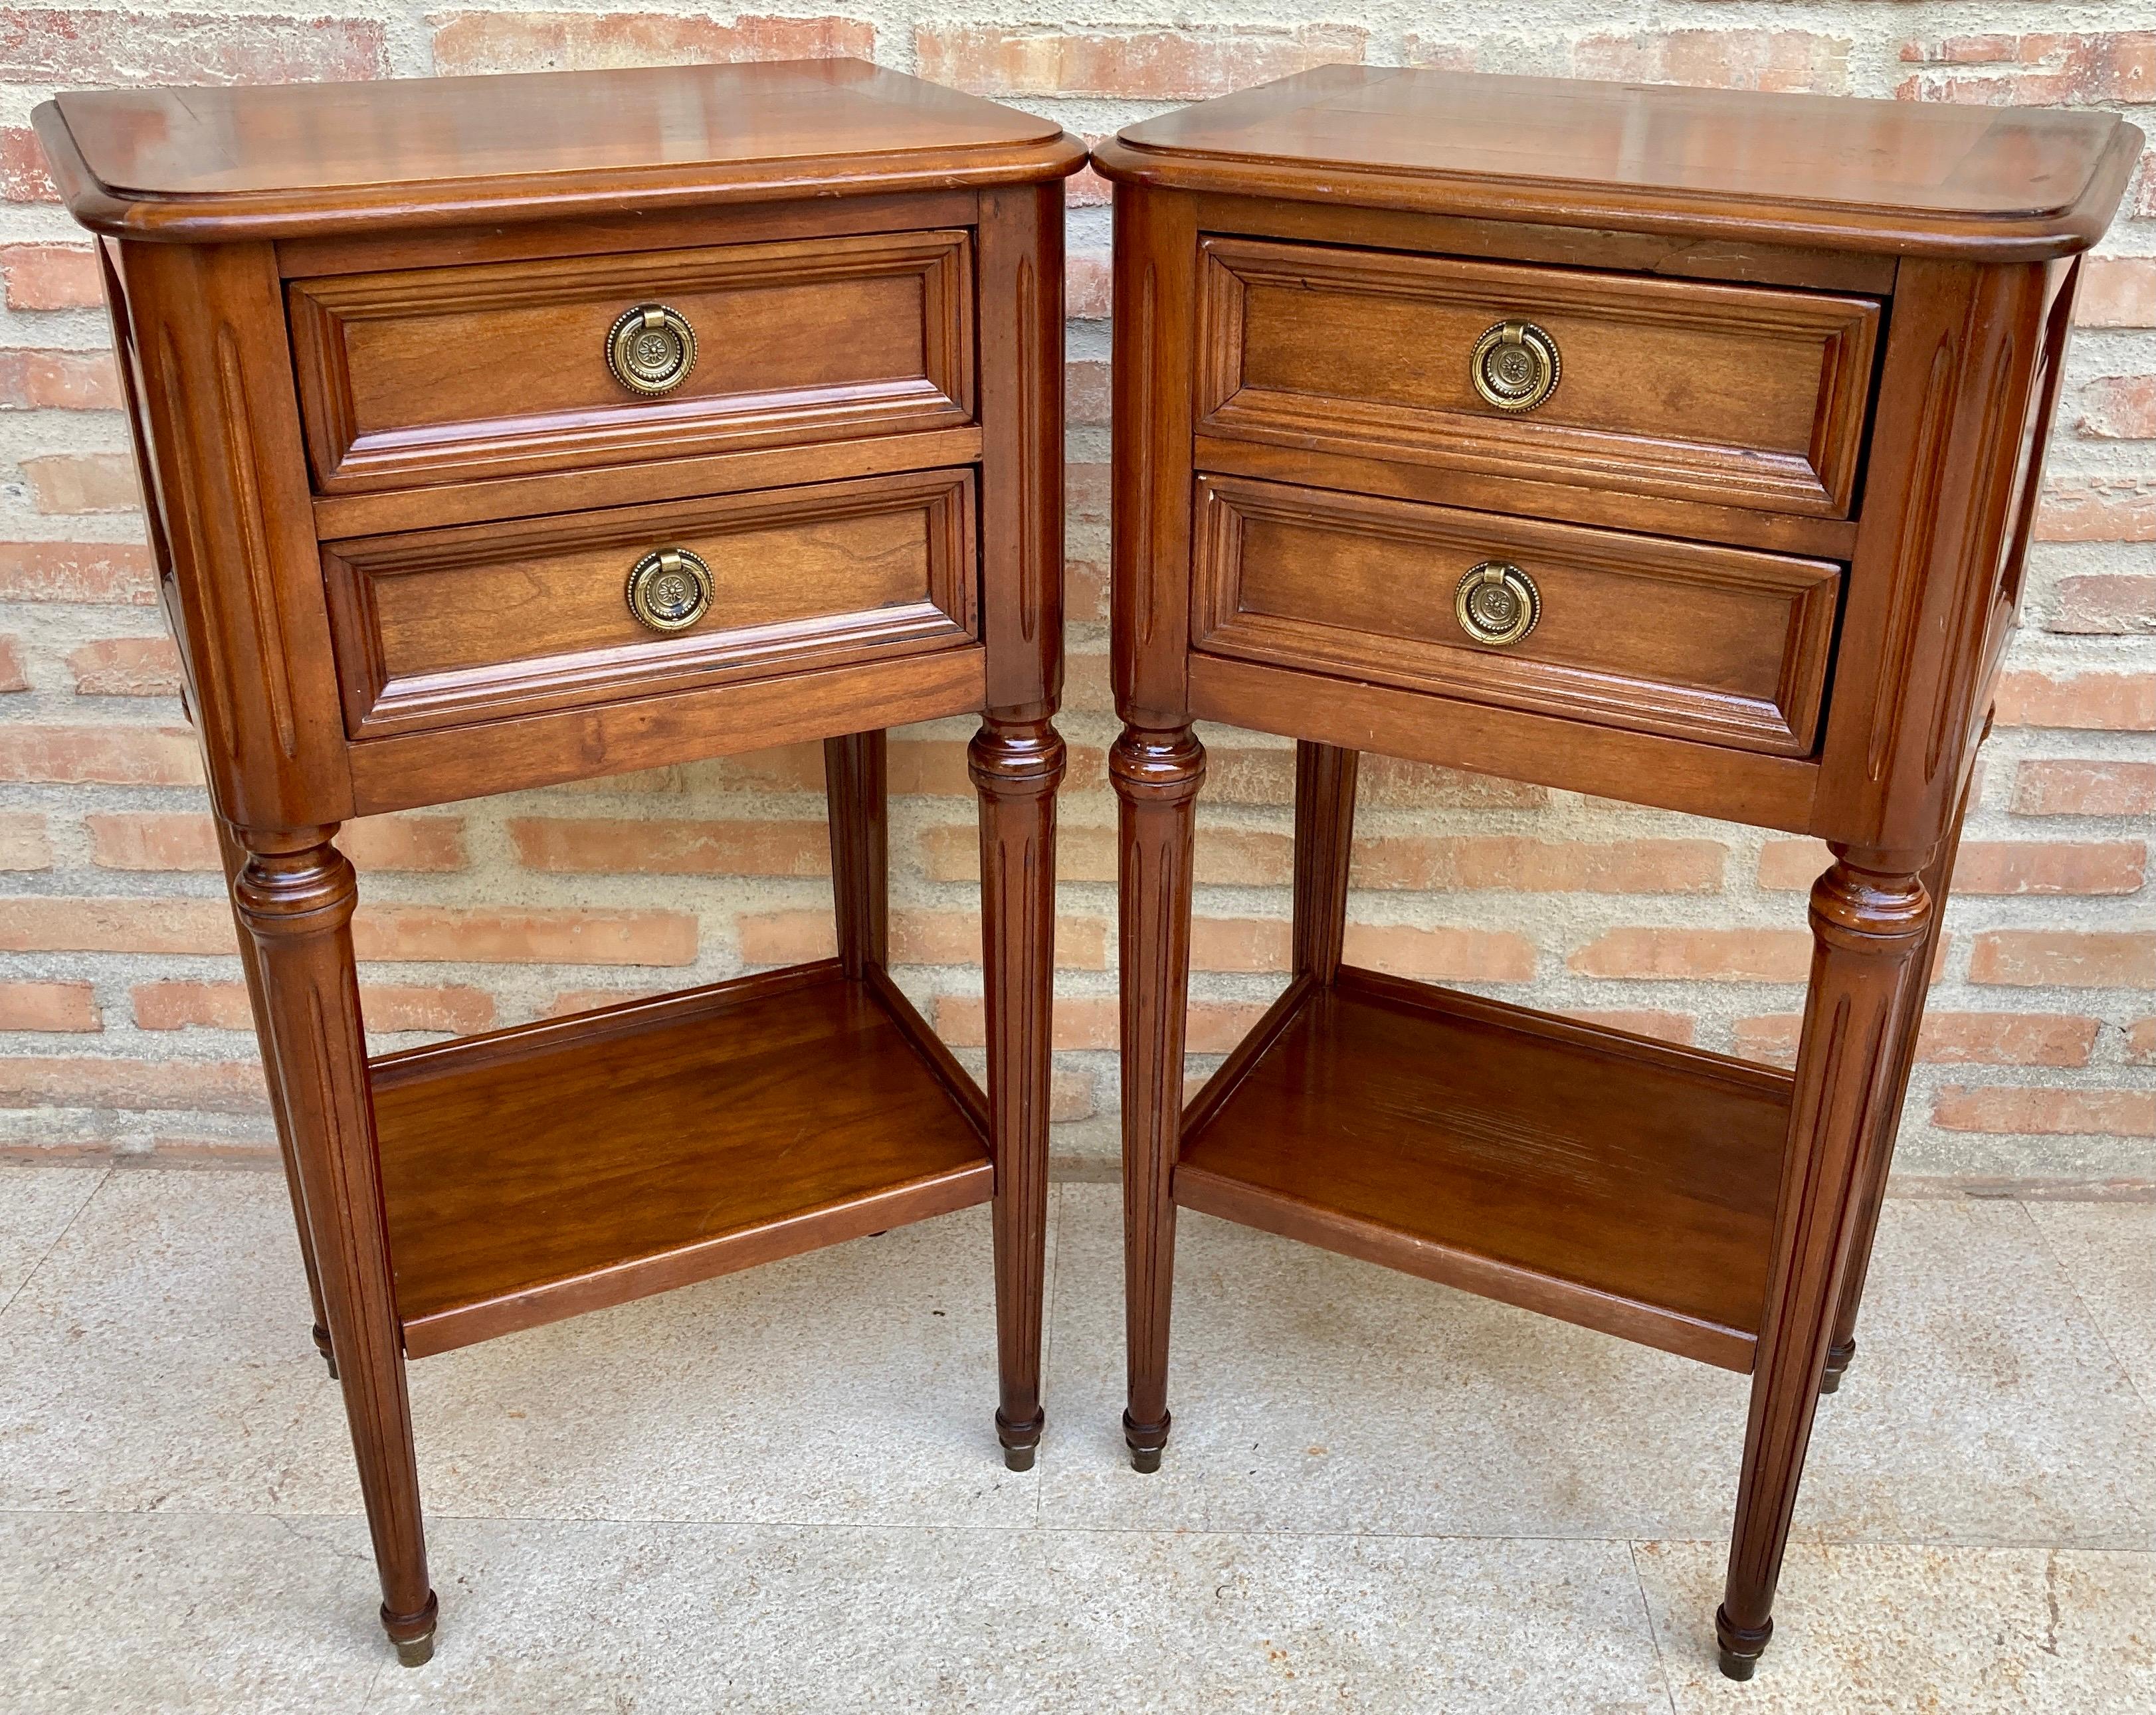 Neoclassical Pair of Mid-Century French Walnut Nightstands with Two Drawers and One Low Shelf